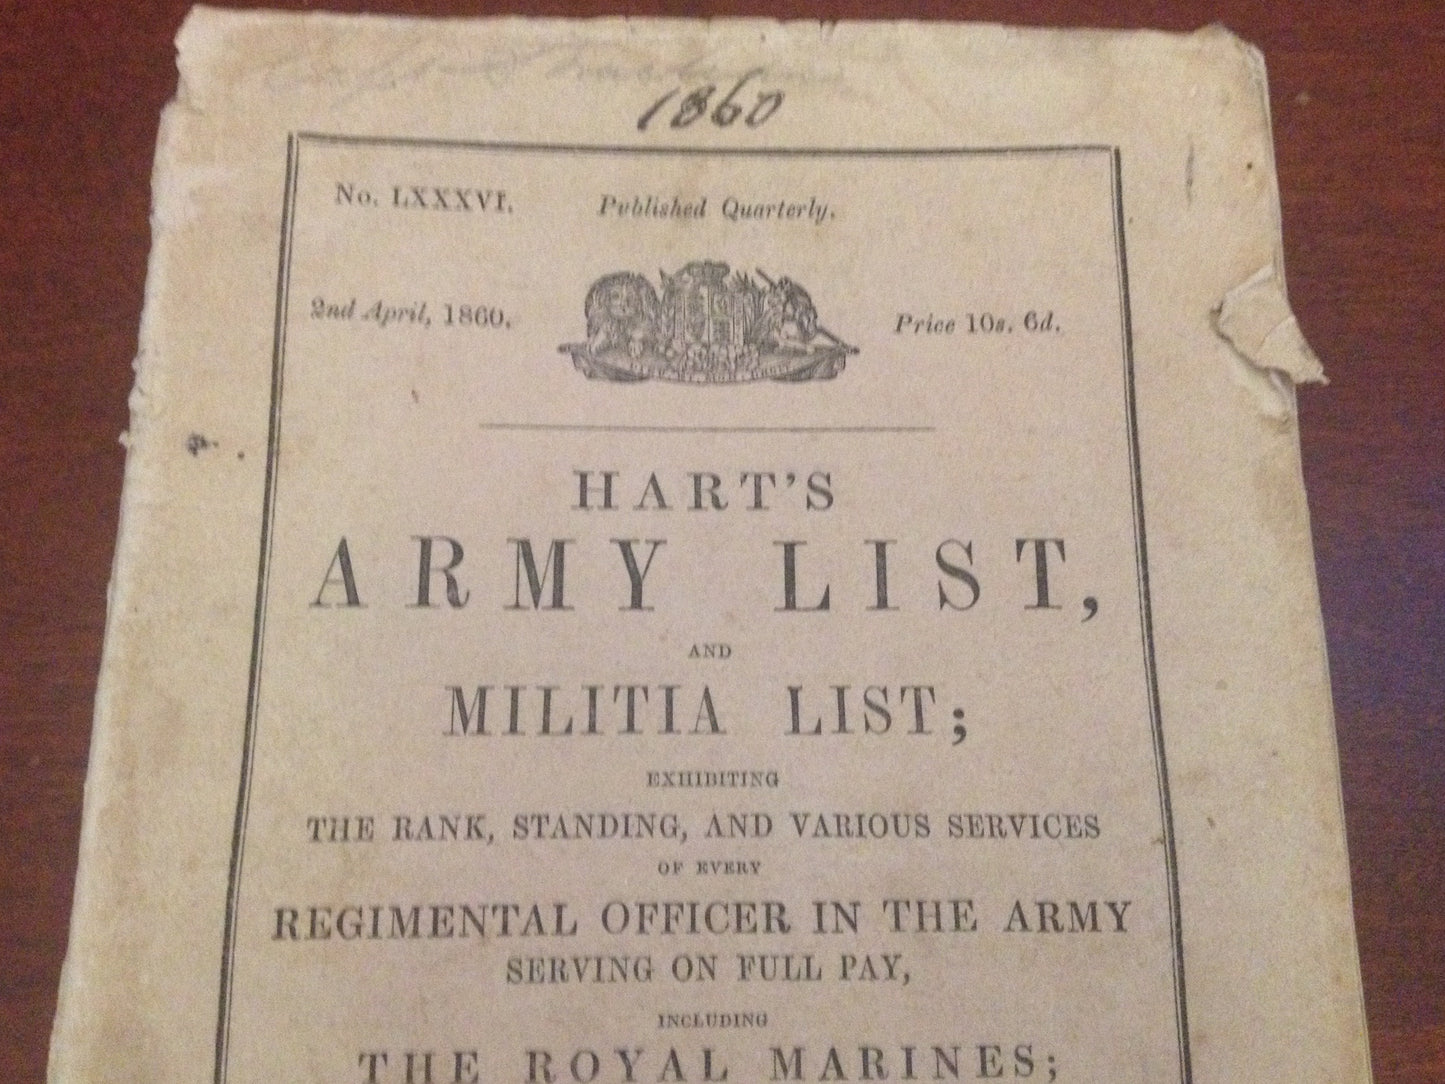 HARTS ARMY LIST, AND MILITIA LIST; EXHIBITING THE RANK ON FULL PAY - H.G. HART